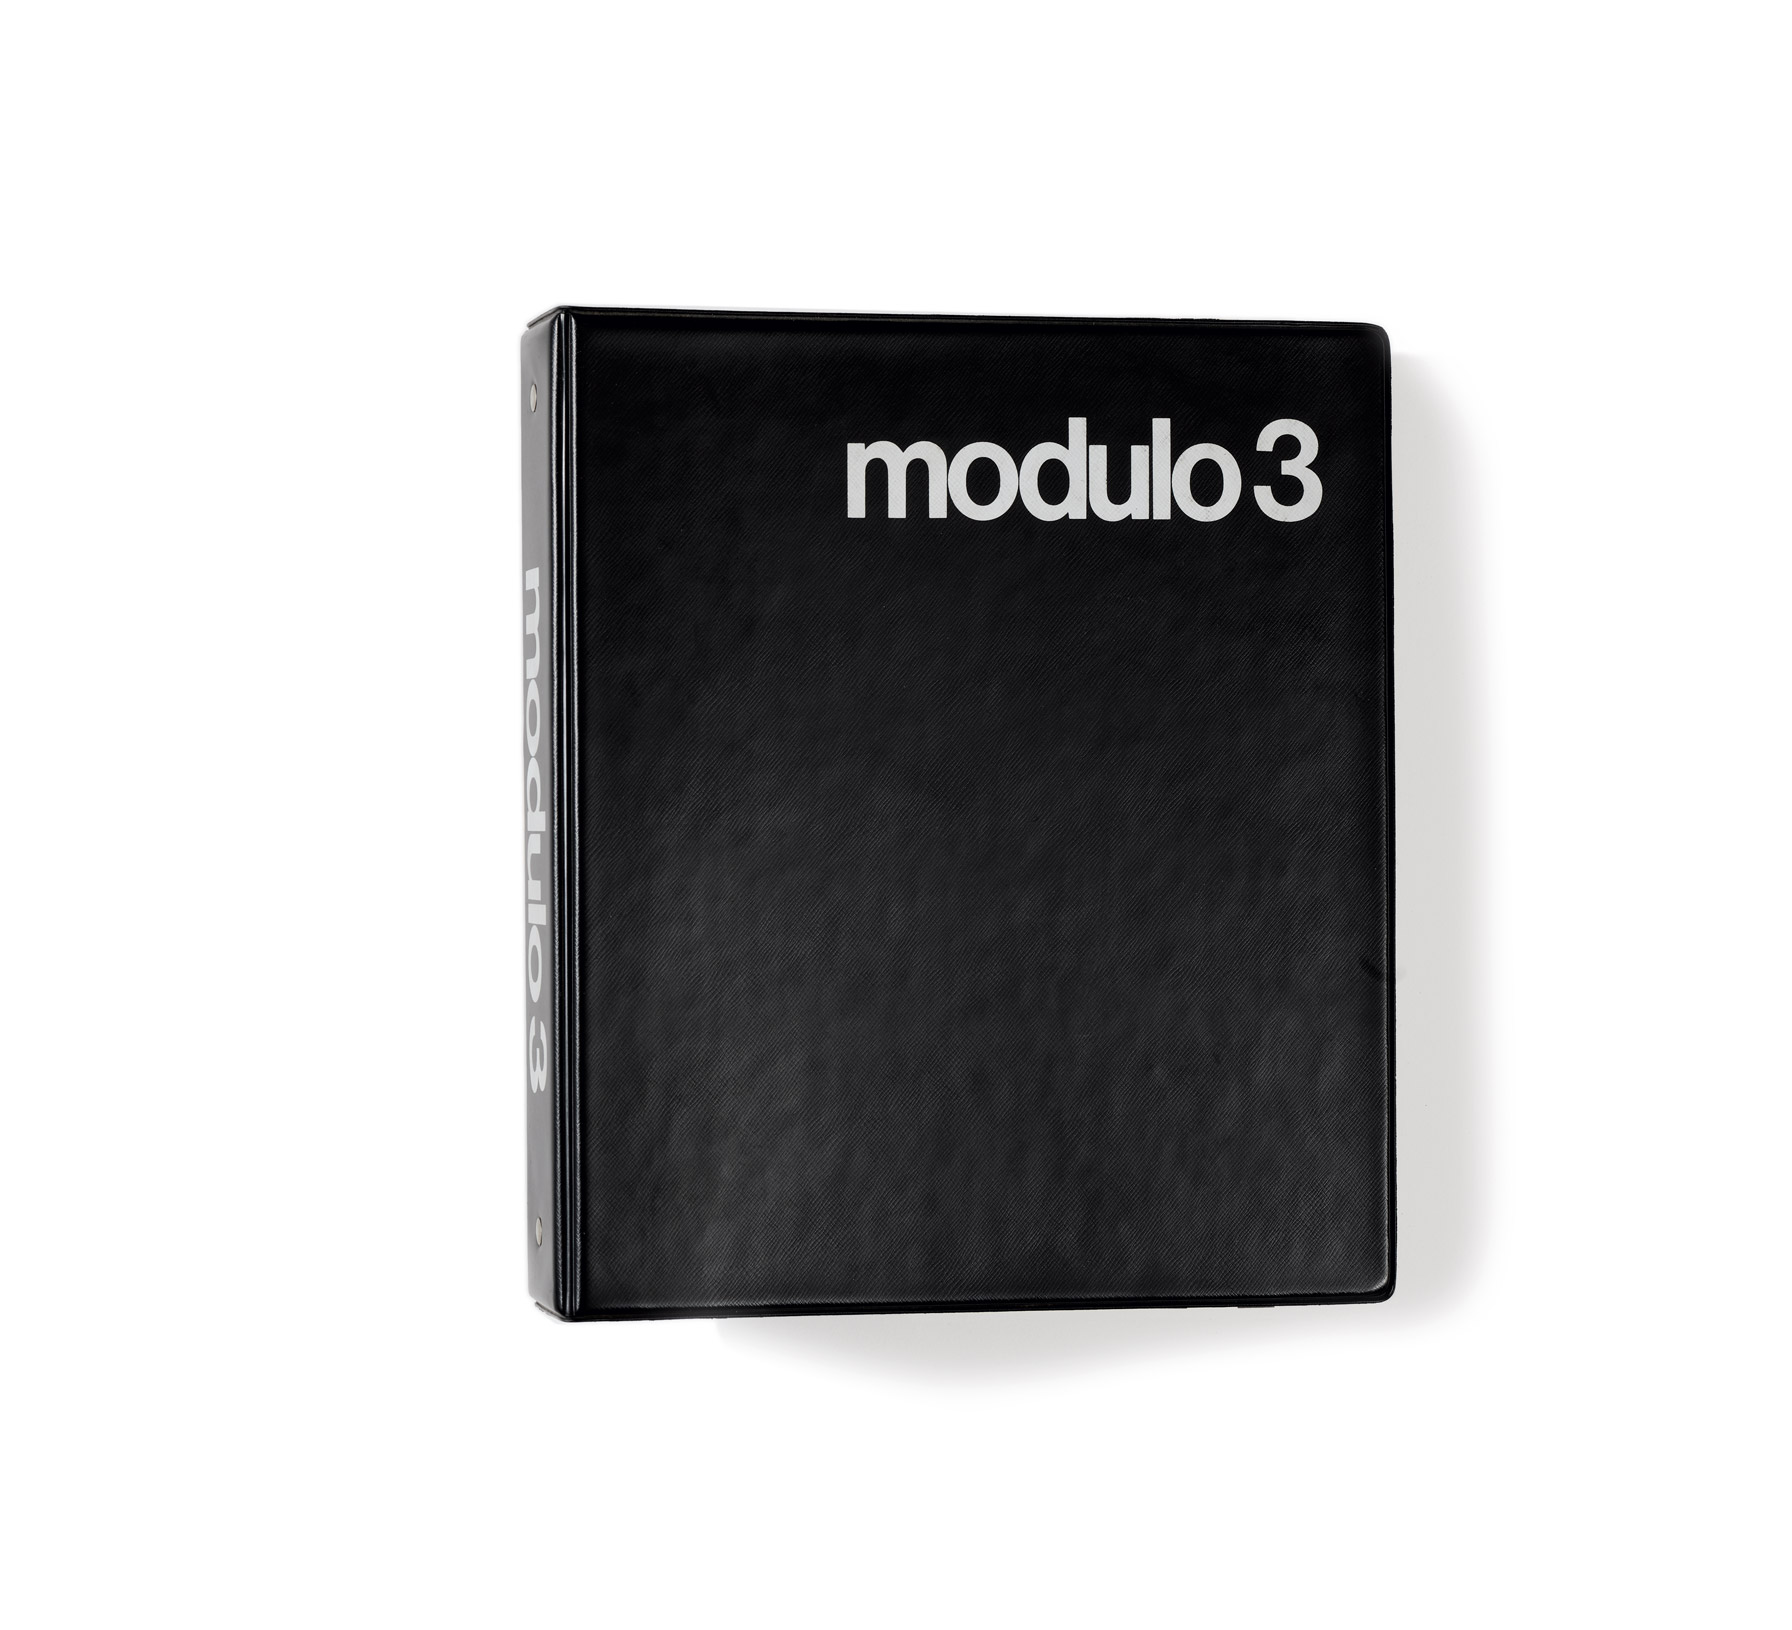 Historical catalogue for the Modulo3 system.